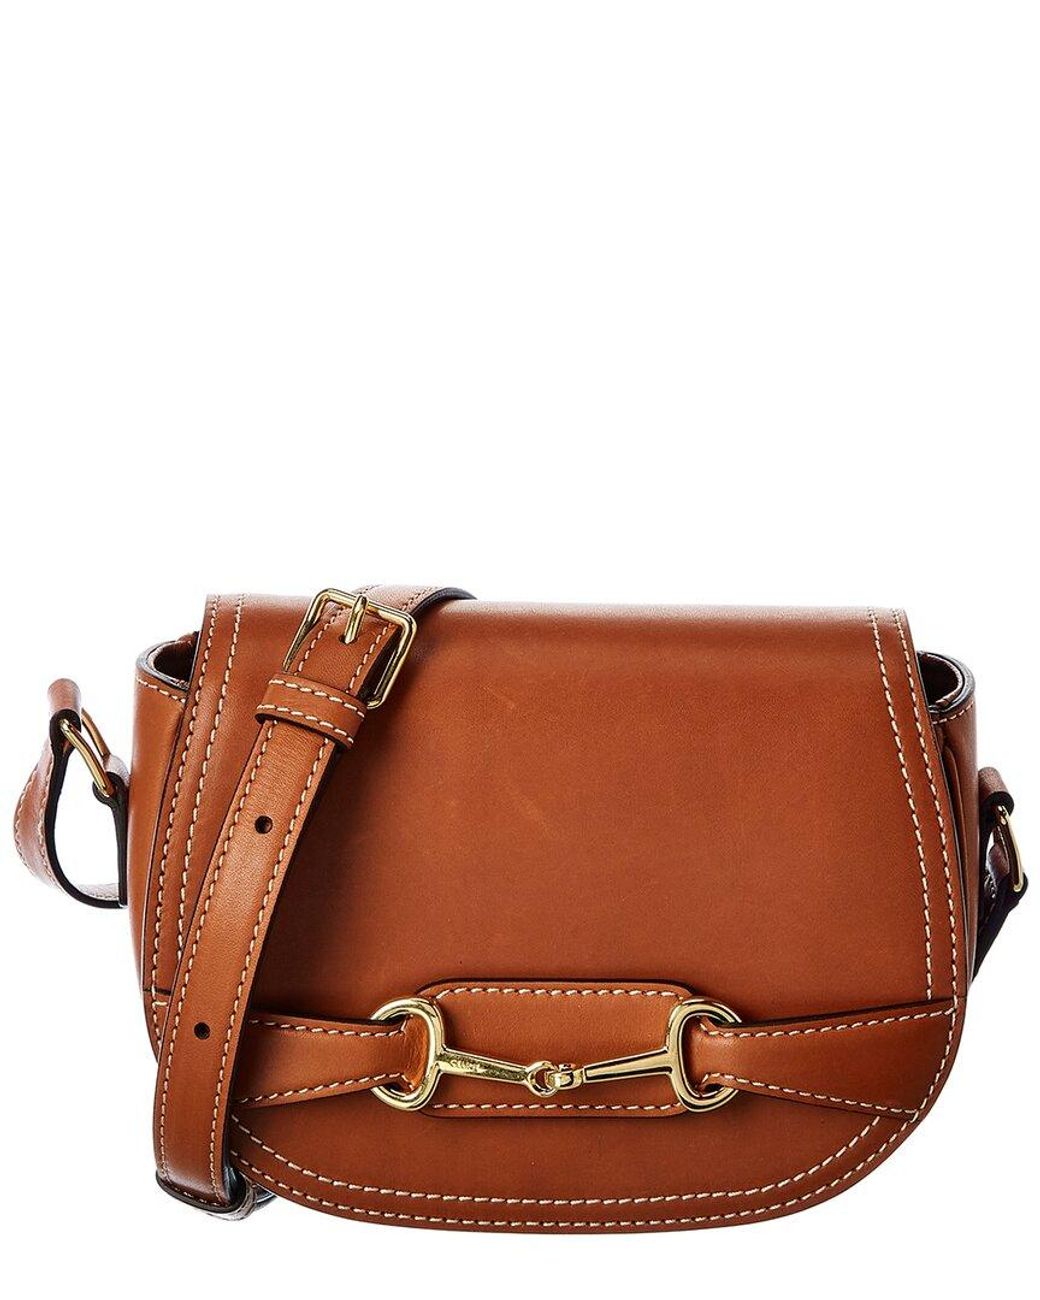 Celine Crecy Small Leather Shoulder Bag in Brown | Lyst